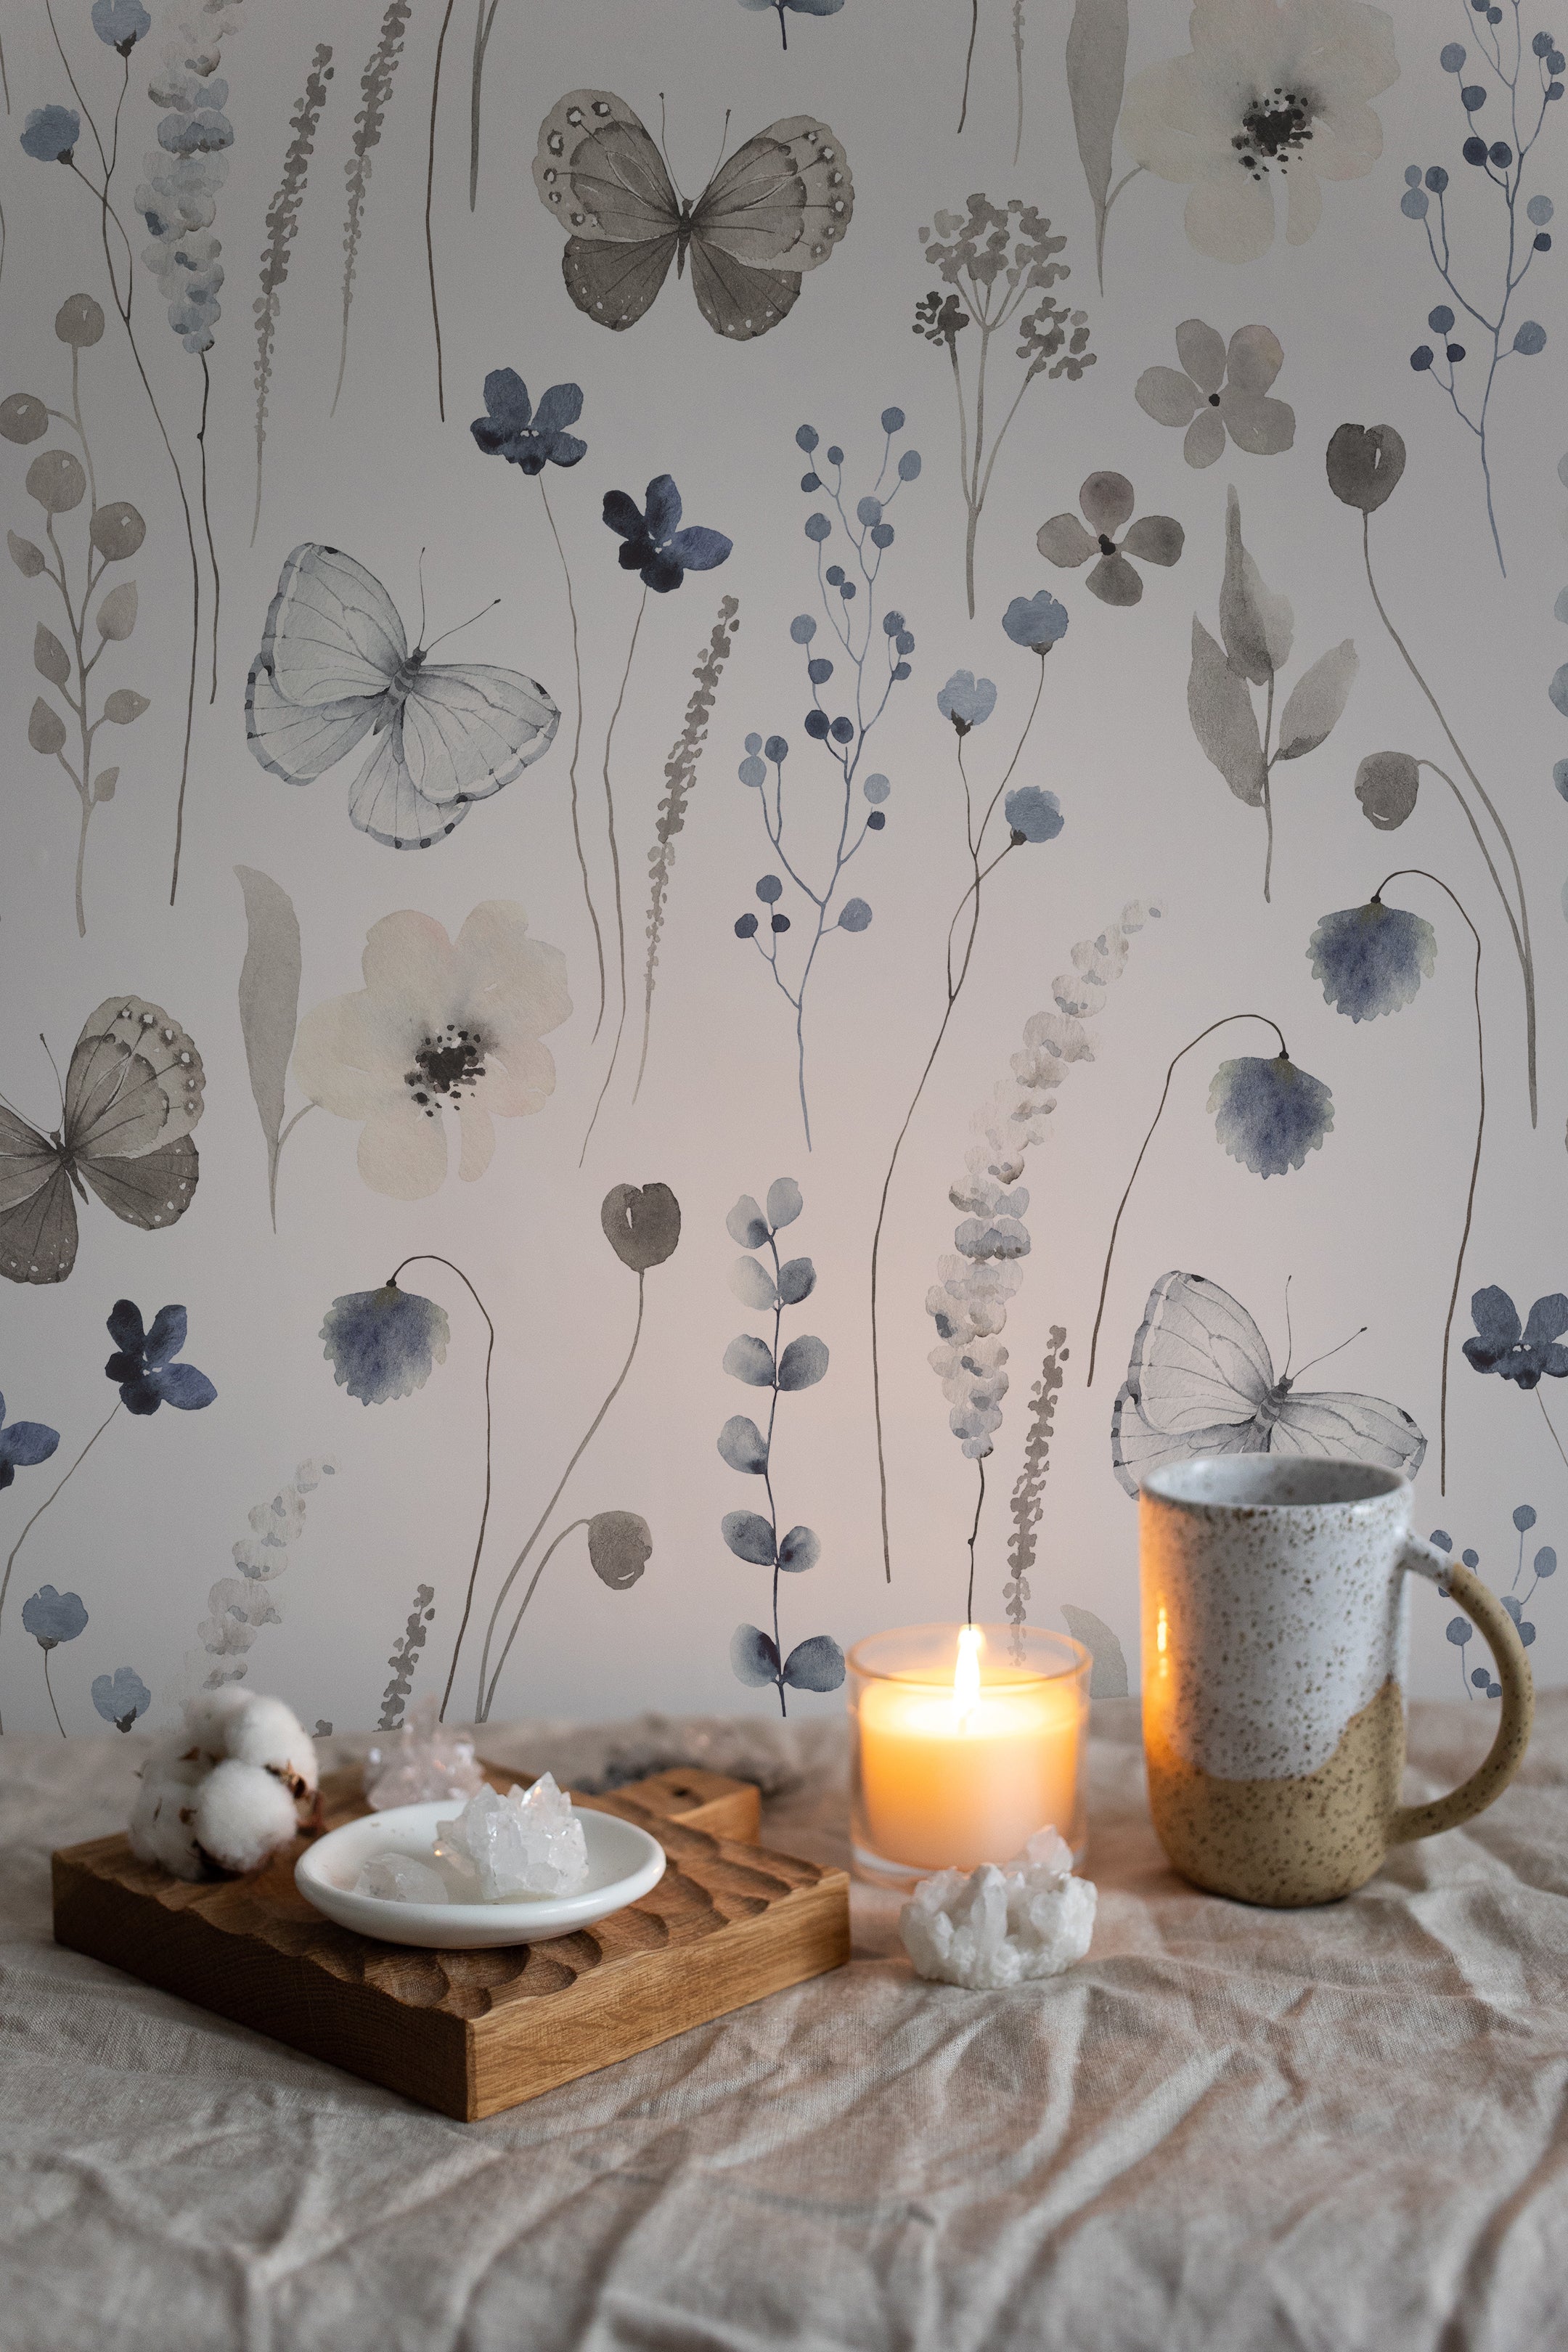 Romantic and warm atmosphere highlighted by Soft Flutter Wallpaper in a dimly lit setting with candles. The wallpaper's soft botanical patterns and butterflies provide a tranquil backdrop to a cozy setting with a mug and candles on a wooden tray